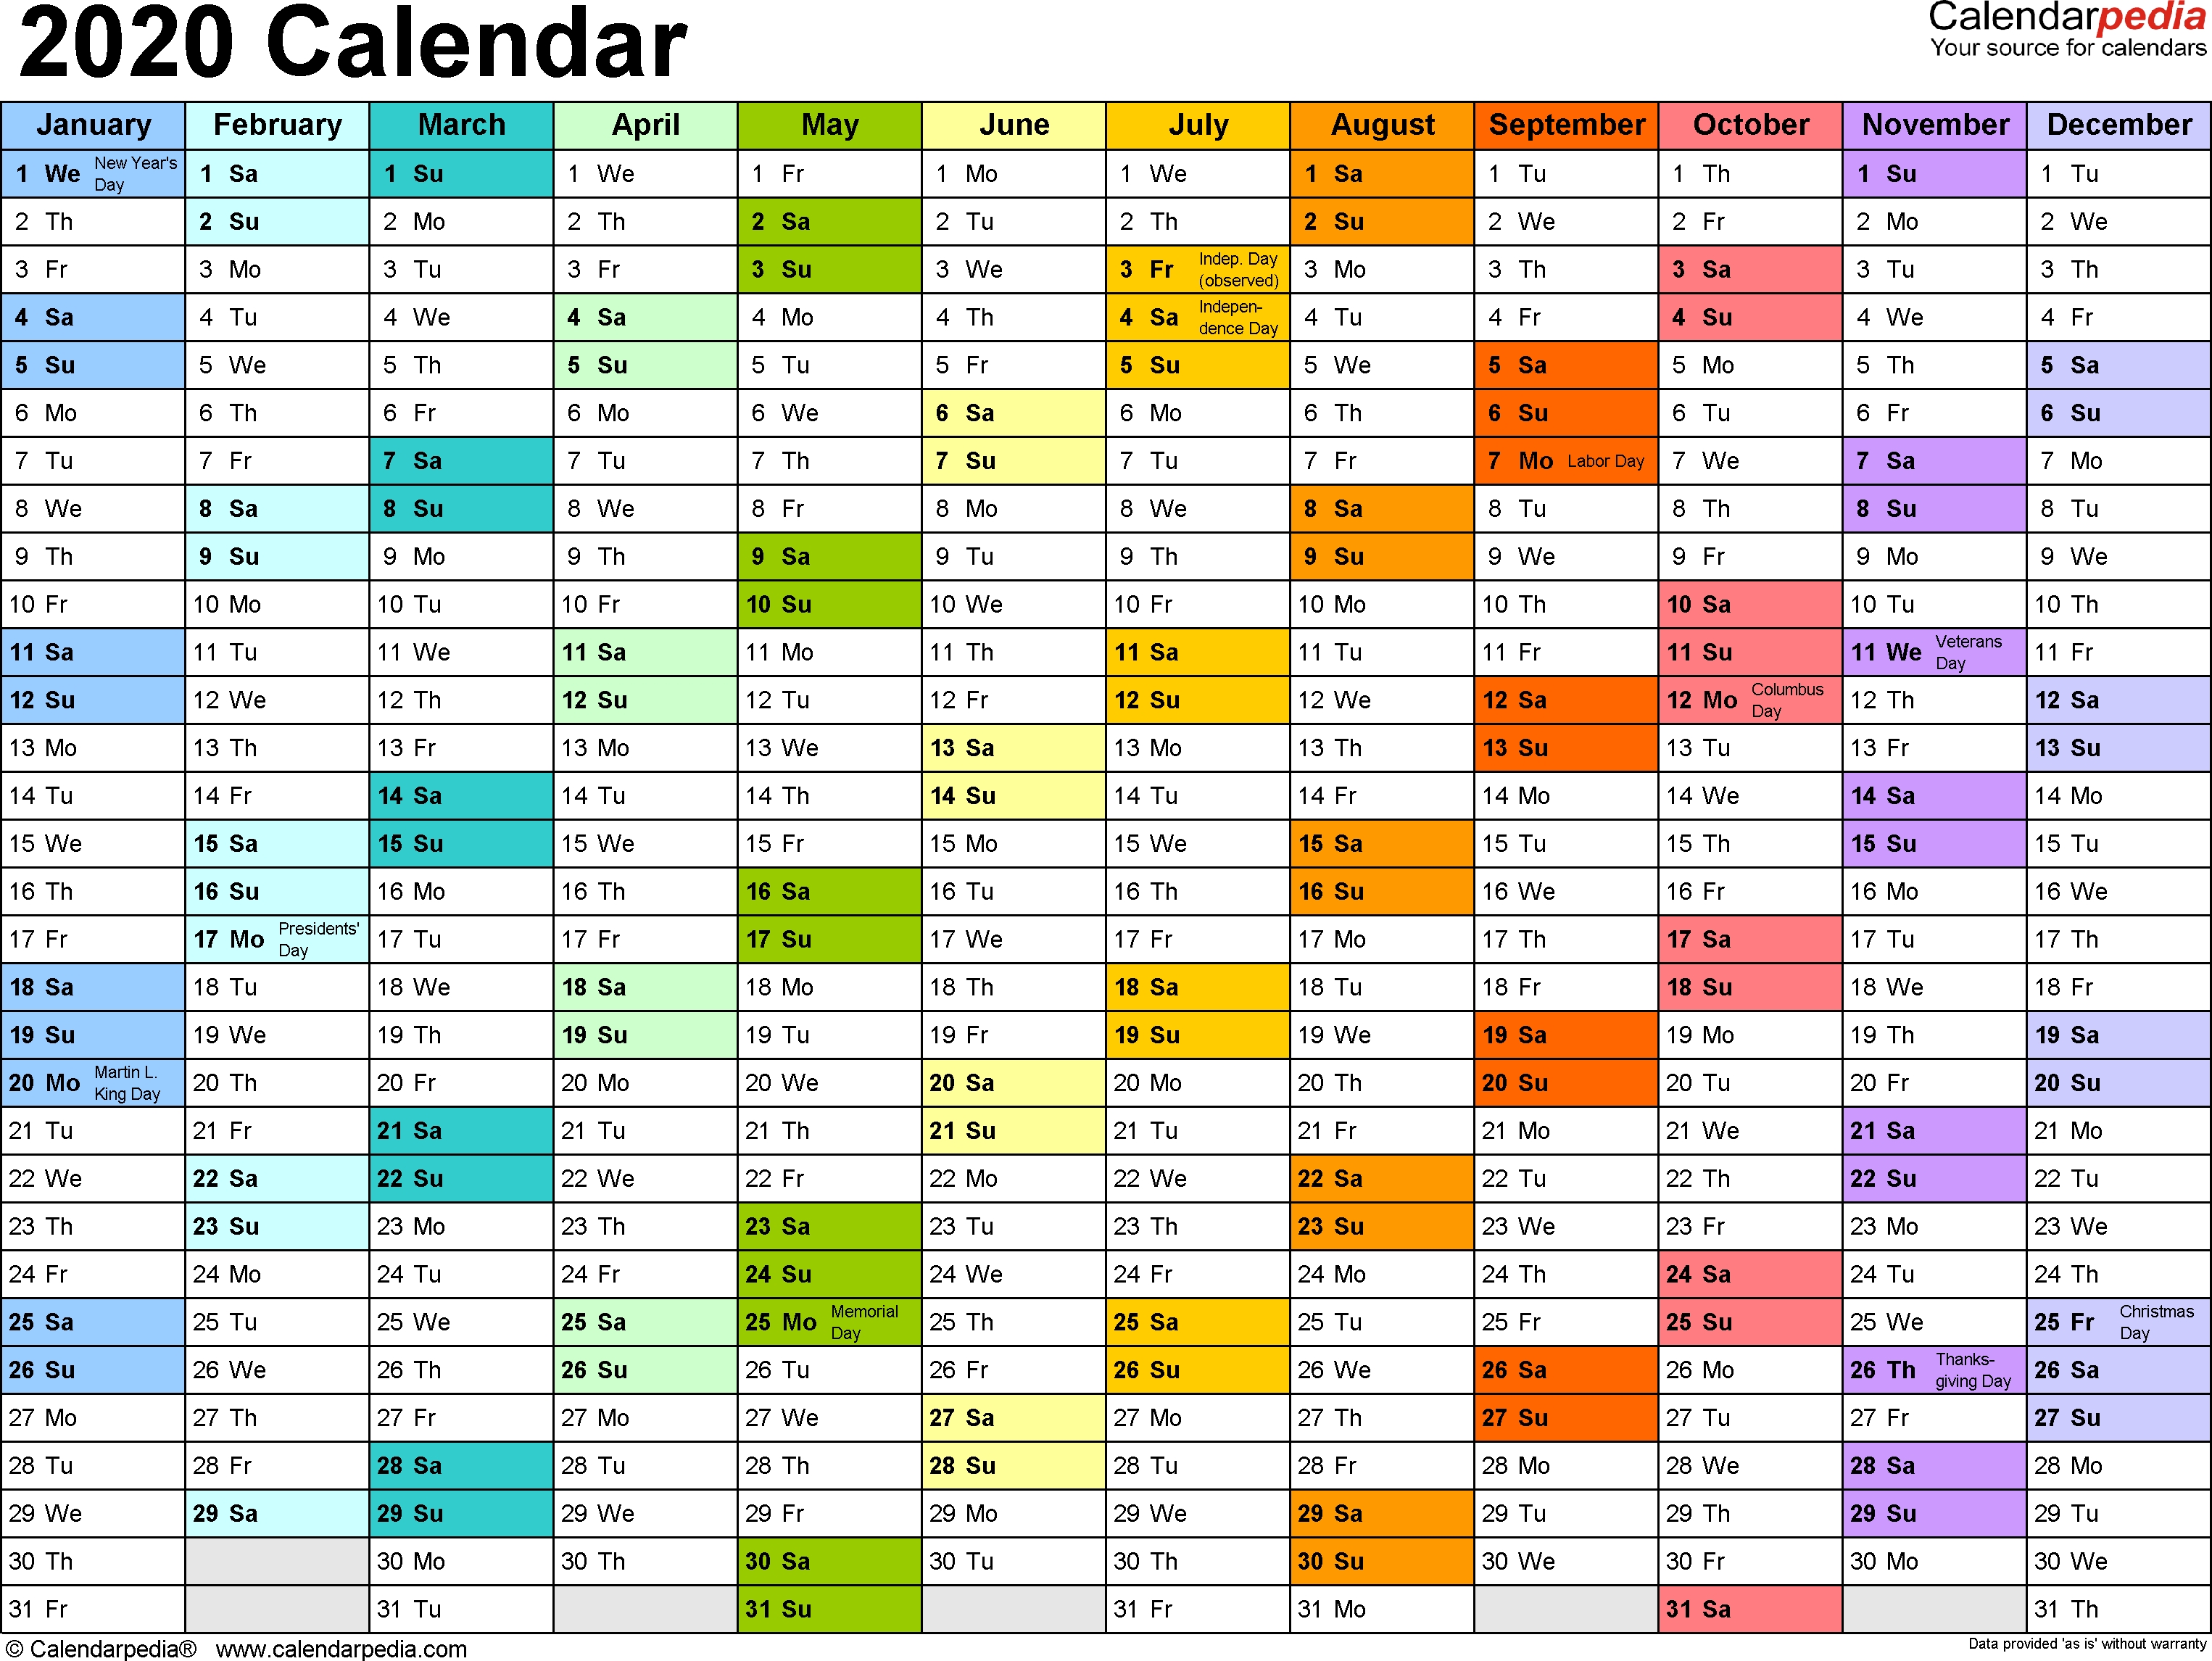 2020 Calendar - Download 18 Free Printable Excel Templates-South Africa Public Holidays 2020